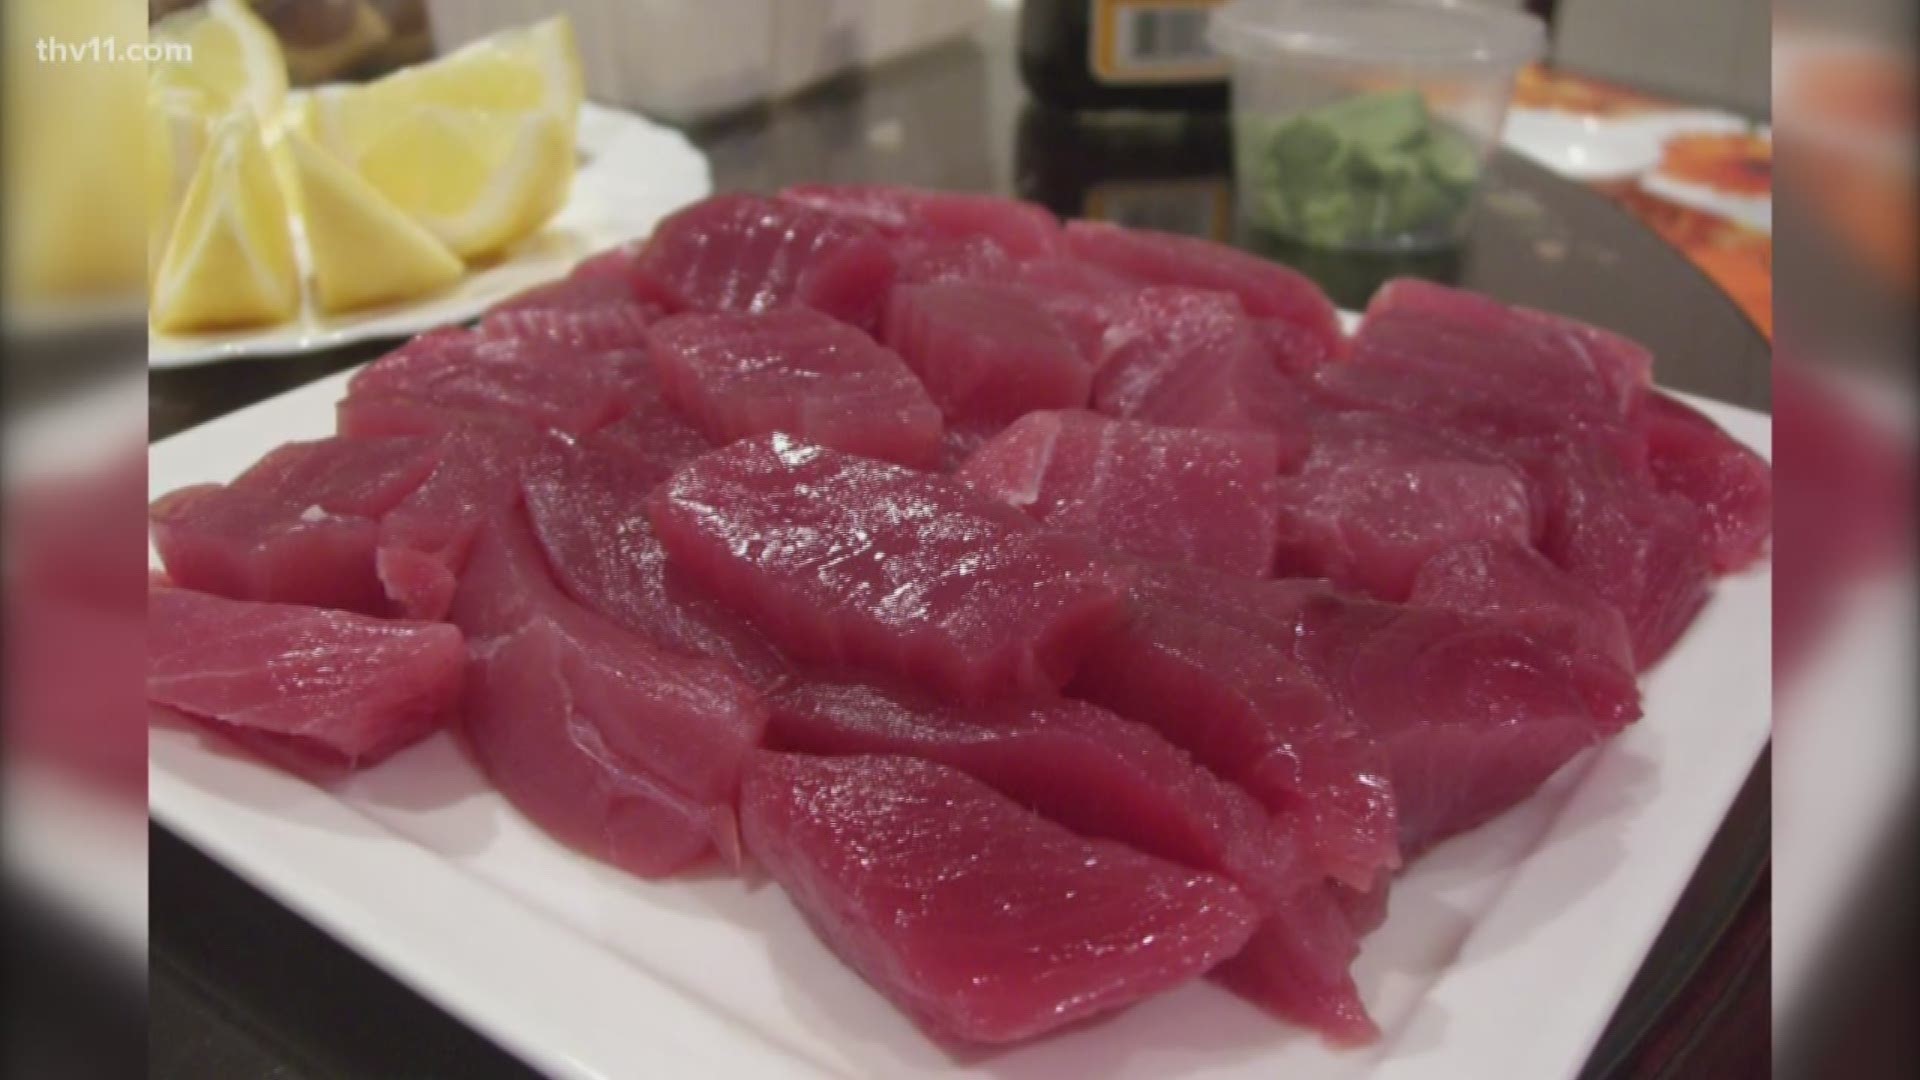 The FDA is advising consumers to not eat yellowfin tuna steaks from Kroger retail stores in Arkansas.